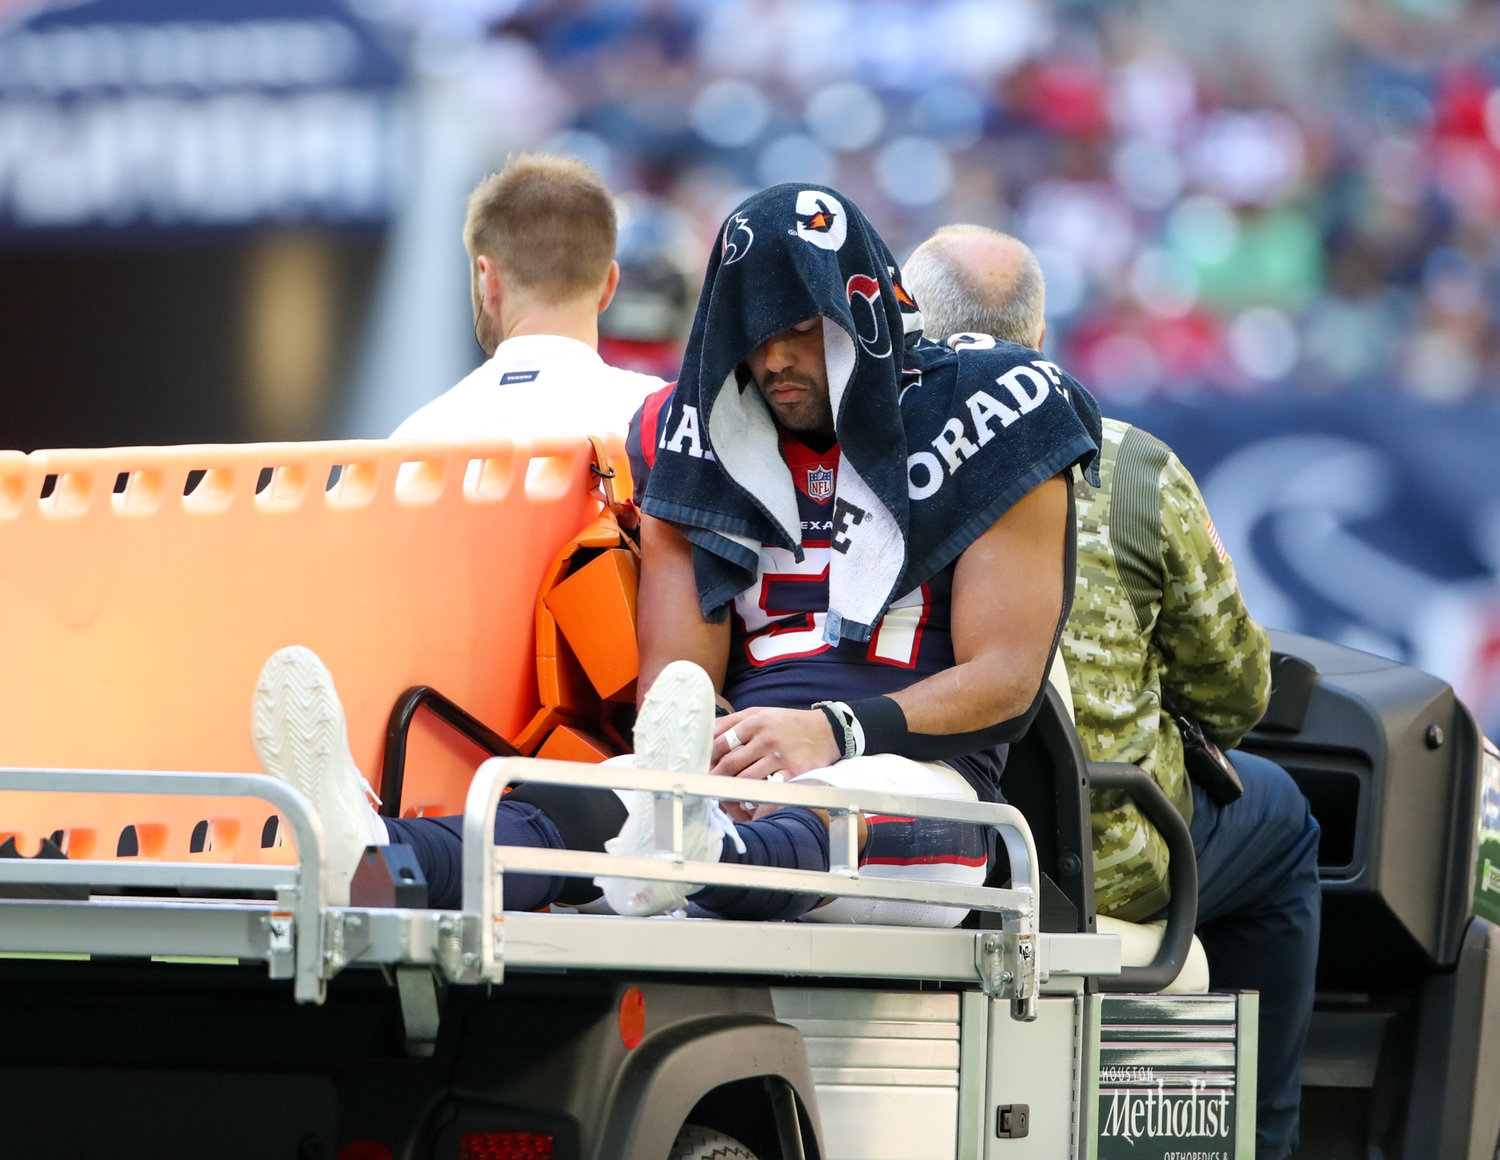 Houston Texans linebacker Kamu Grugier-Hill (51) is carted off the field after sustaining an injury during the second half of an NFL game between the Seahawks and the Texans on December 12, 2021 in Houston, Texas.